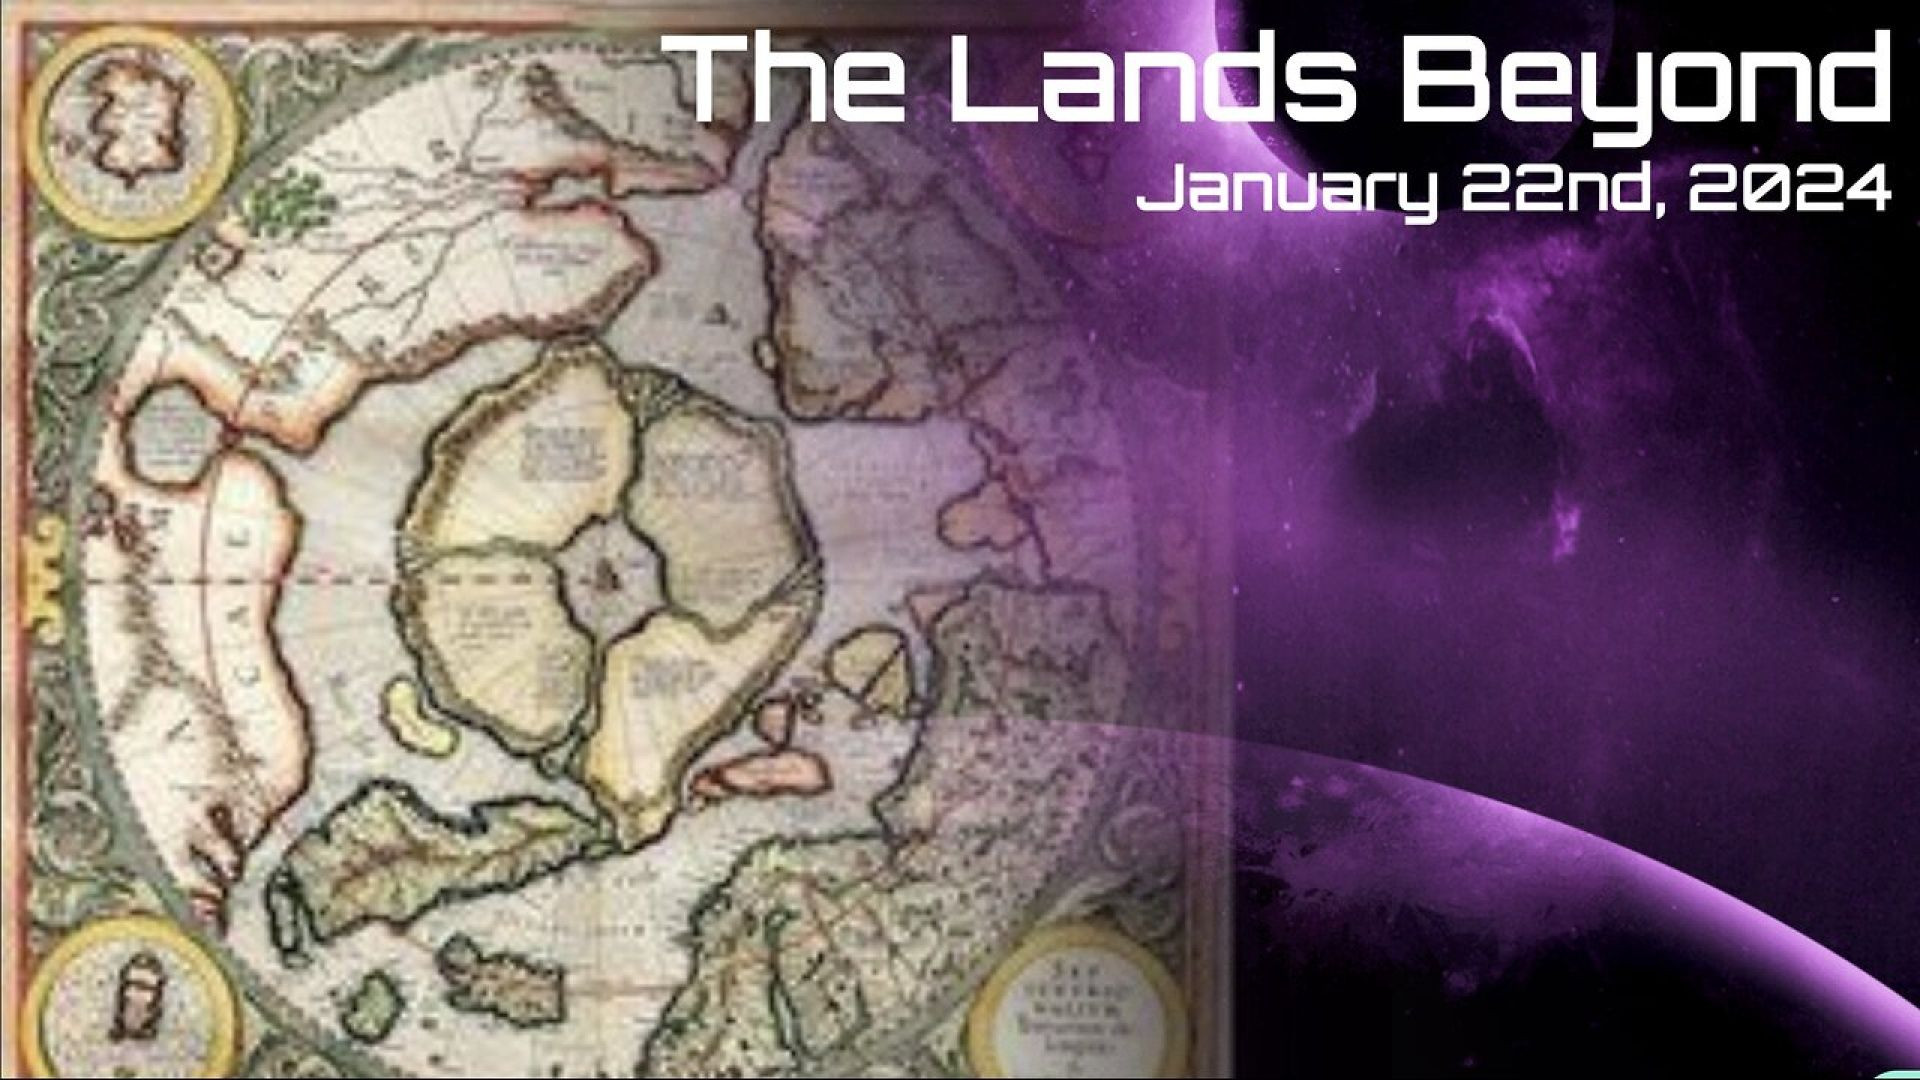 The Lands Beyond - January 22nd, 2024